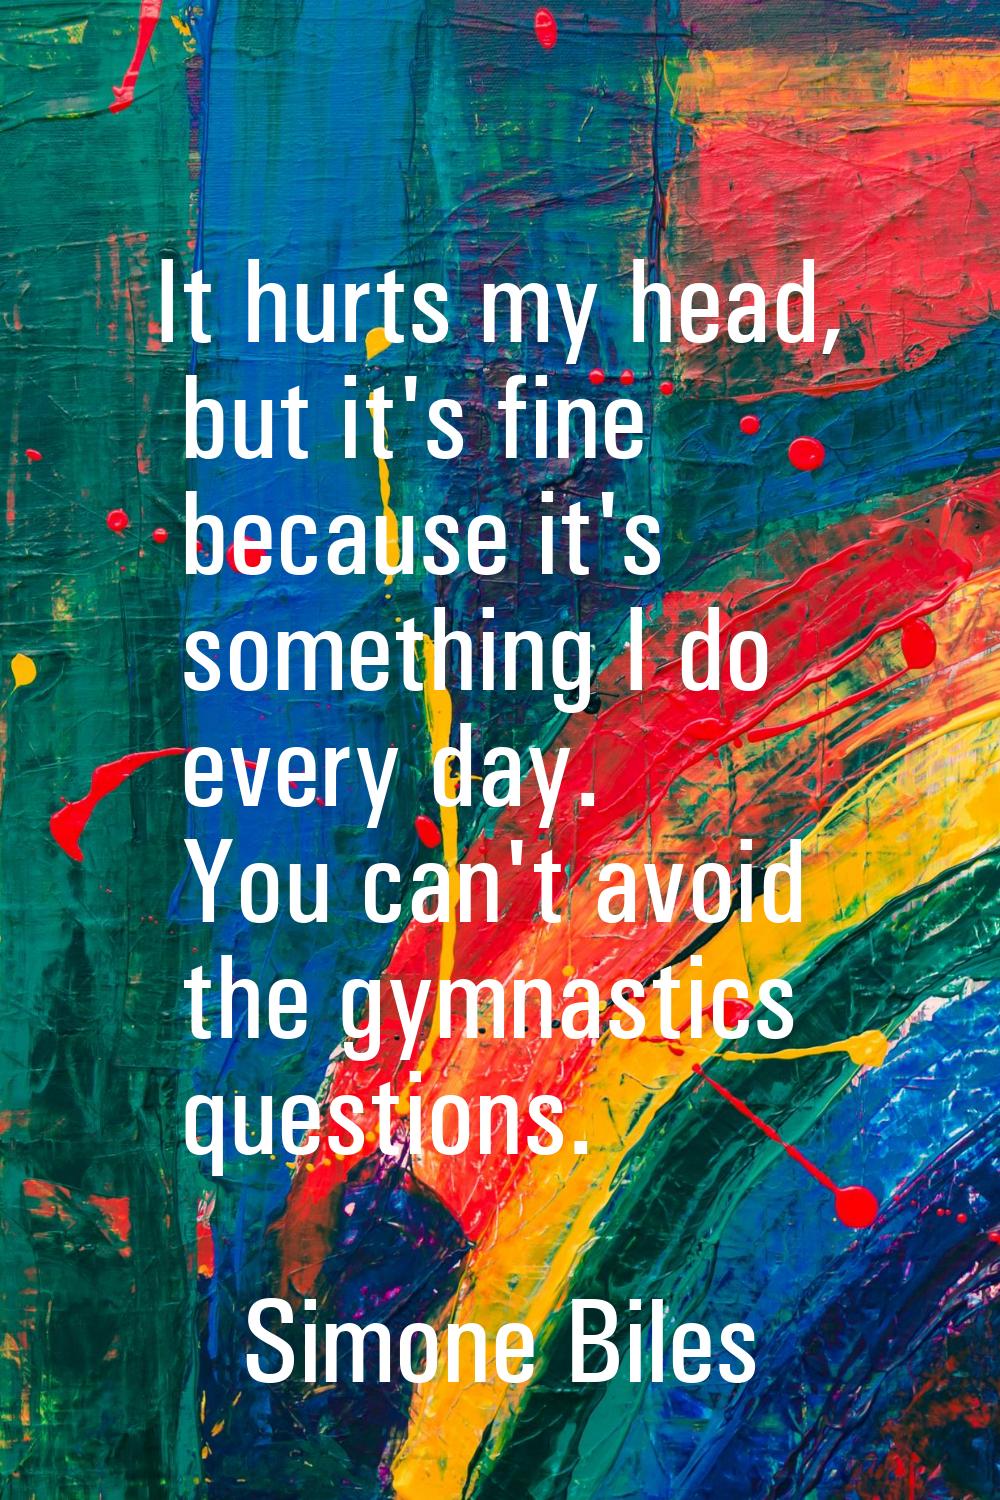 It hurts my head, but it's fine because it's something I do every day. You can't avoid the gymnasti